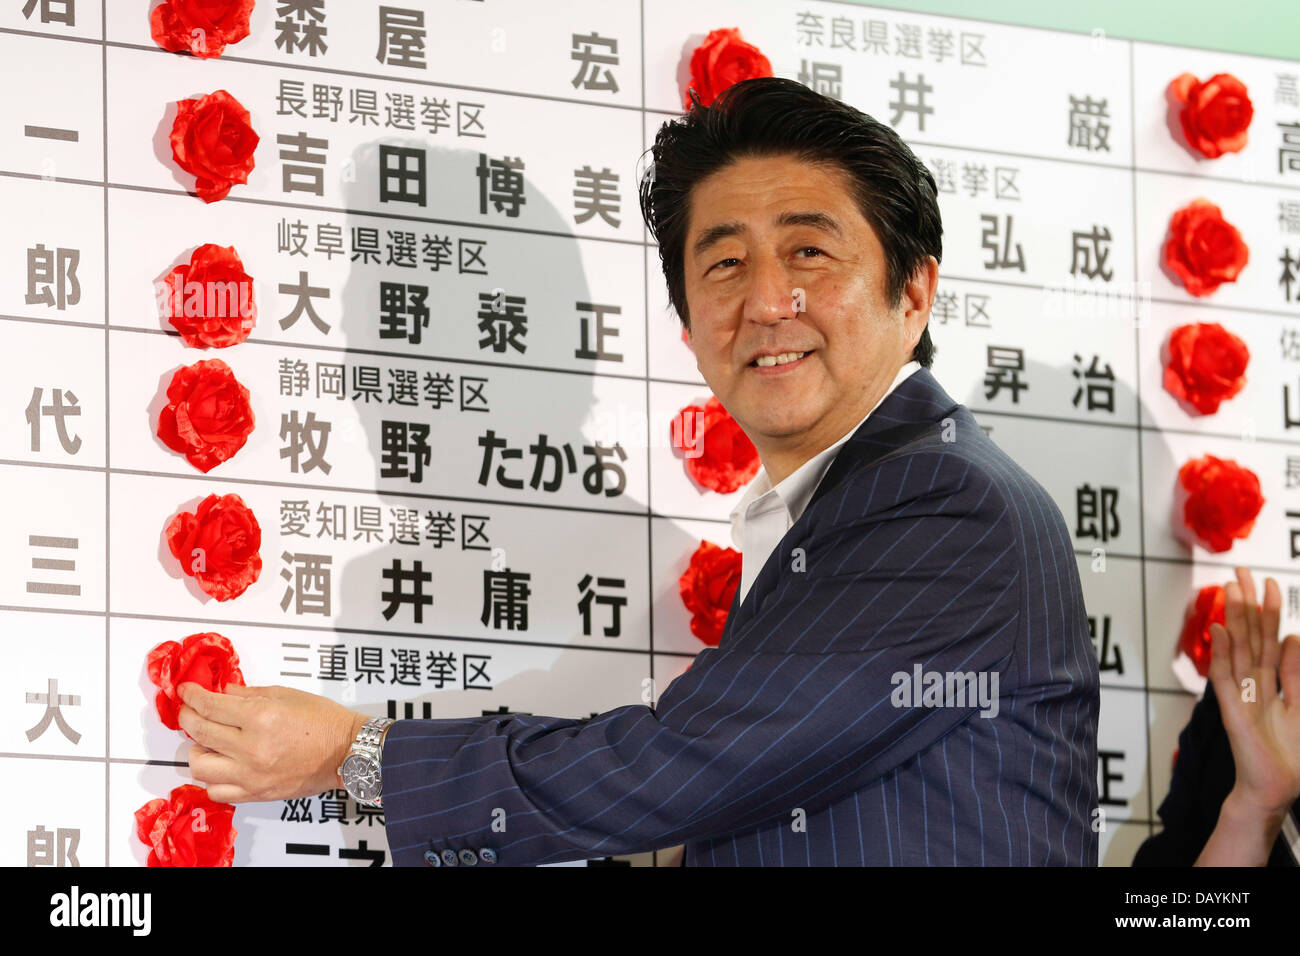 Tokyo, Japan. 21st July, 2013. Shinzo Abe, center, Japan's prime minister and president of the ruling Liberal Democratic Party, pins a paper rose on the name of a winning candidate at the party's election headquarters in Tokyo on Sunday, July 21, 2013. A decisive victory by Abe's coalition bloc in Sunday's upper house election would give him a a total control of both houses of parliament, setting the stage for Japan's first stable government since 2006. Credit:  AFLO/Alamy Live News Stock Photo